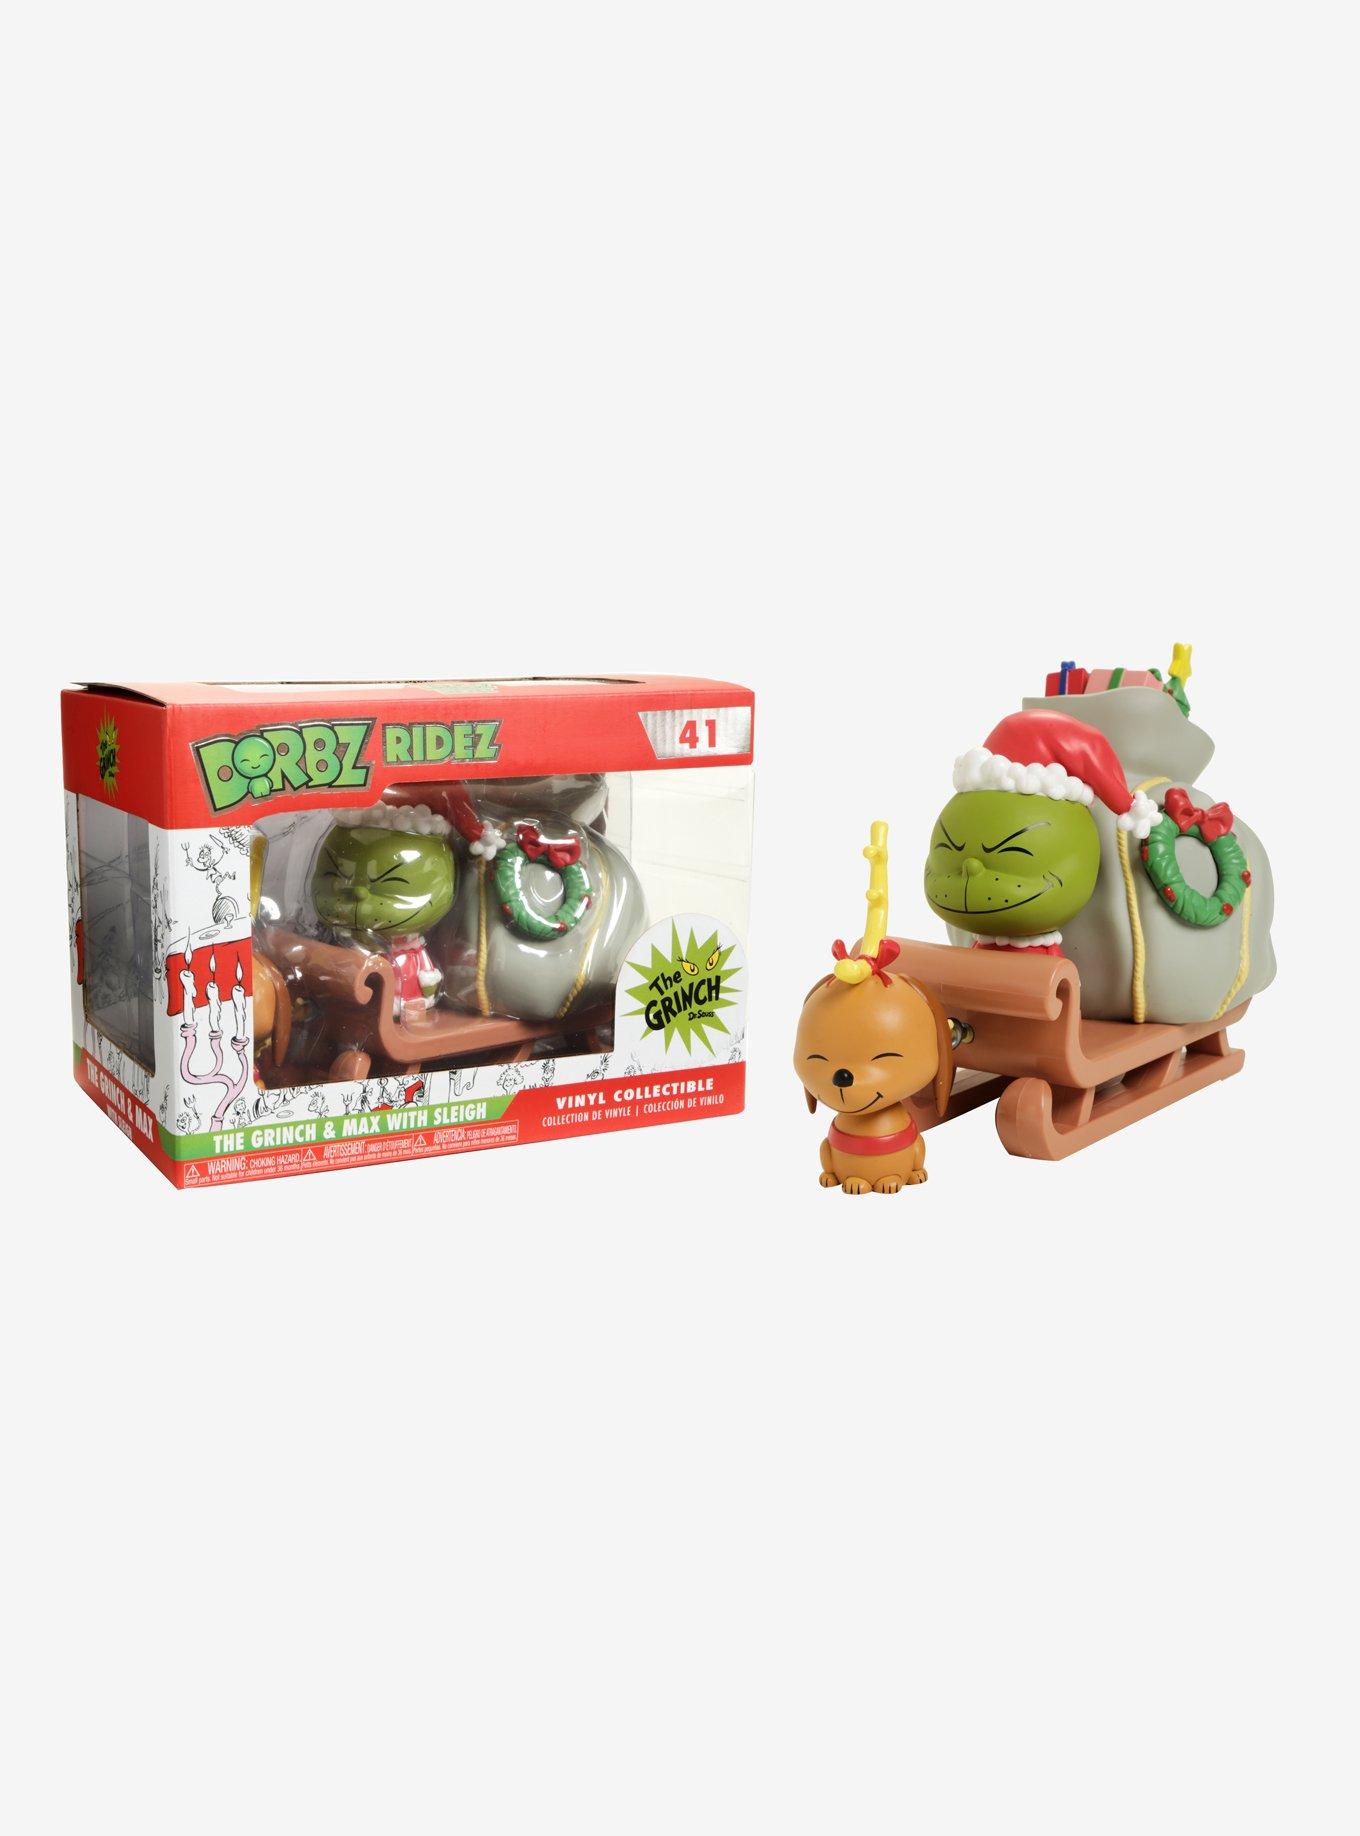 Funko Dr. Seuss How The Grinch Stole Christmas Dorbz Ridez The Grinch & Max With Sleigh Vinyl Collectible, , hi-res